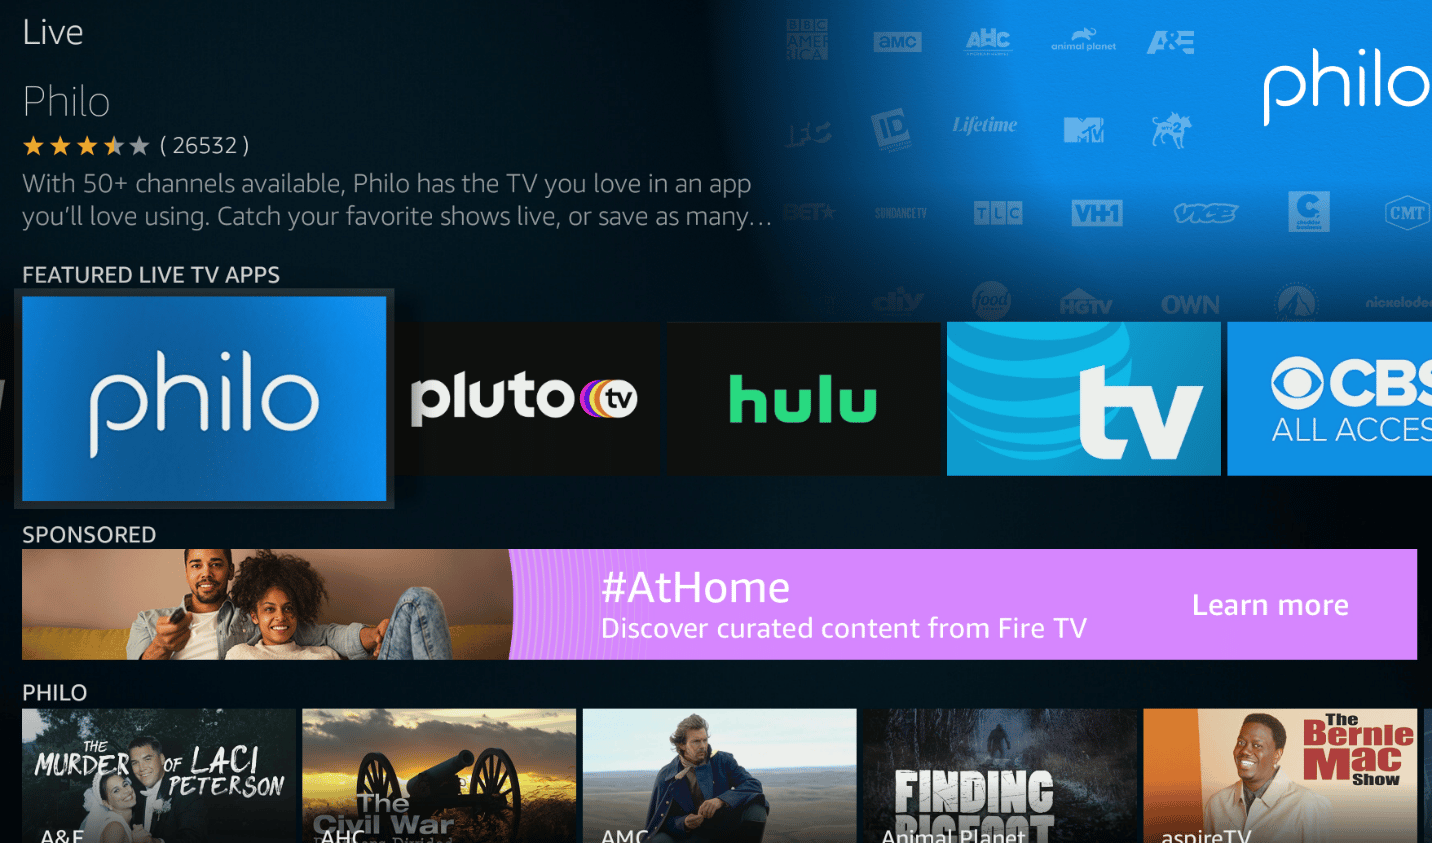 philo interface on fire tv. How to Get Philo Free Trial